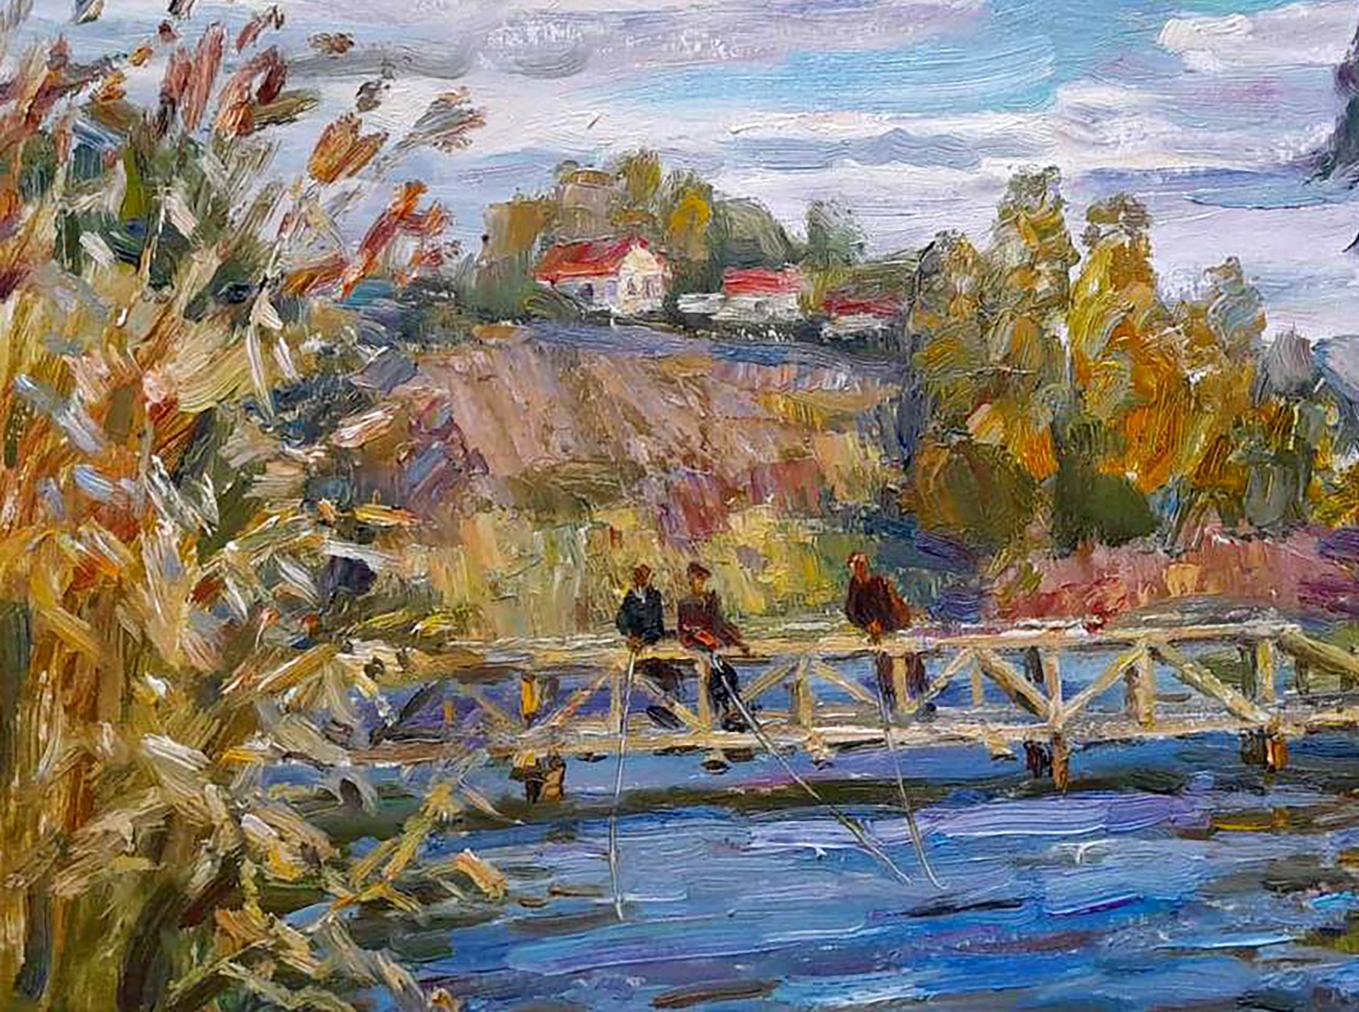 In the oil painting by Ivan Mikhailovich Kovalenko, fishermen can be seen on the bridge